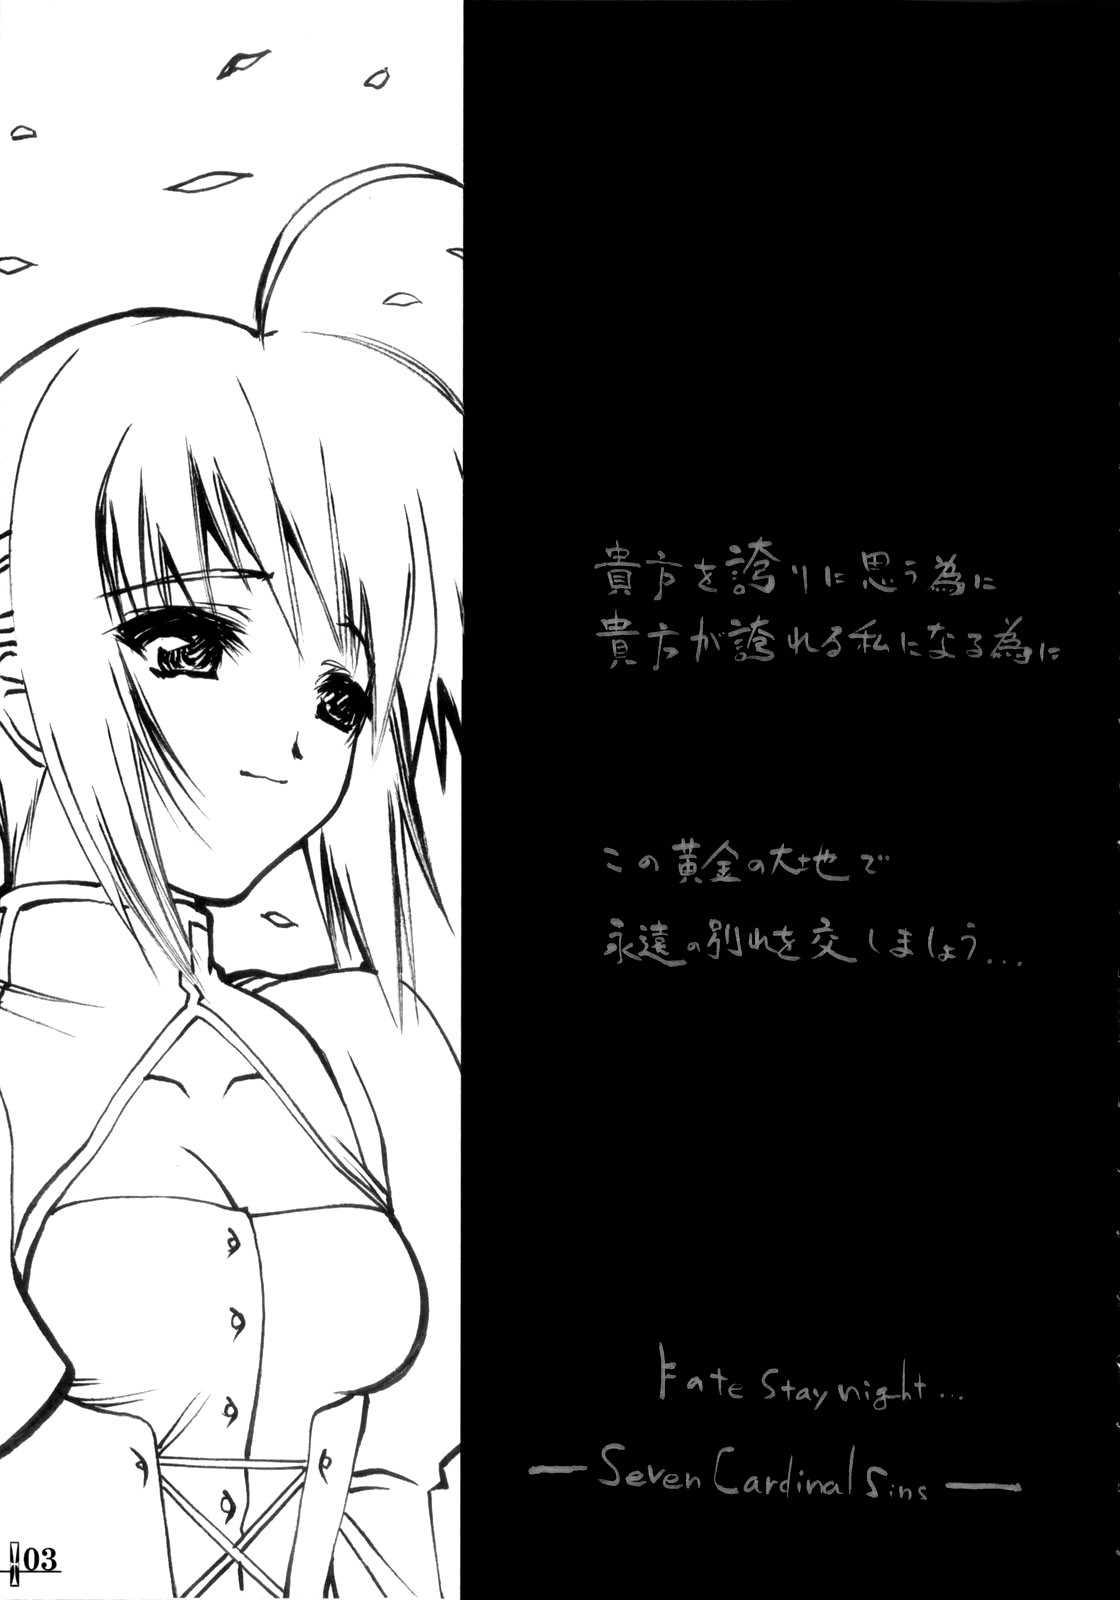 Groupsex Seven Cardinal Sins みりおんばんく - Fate stay night Slut - Page 2